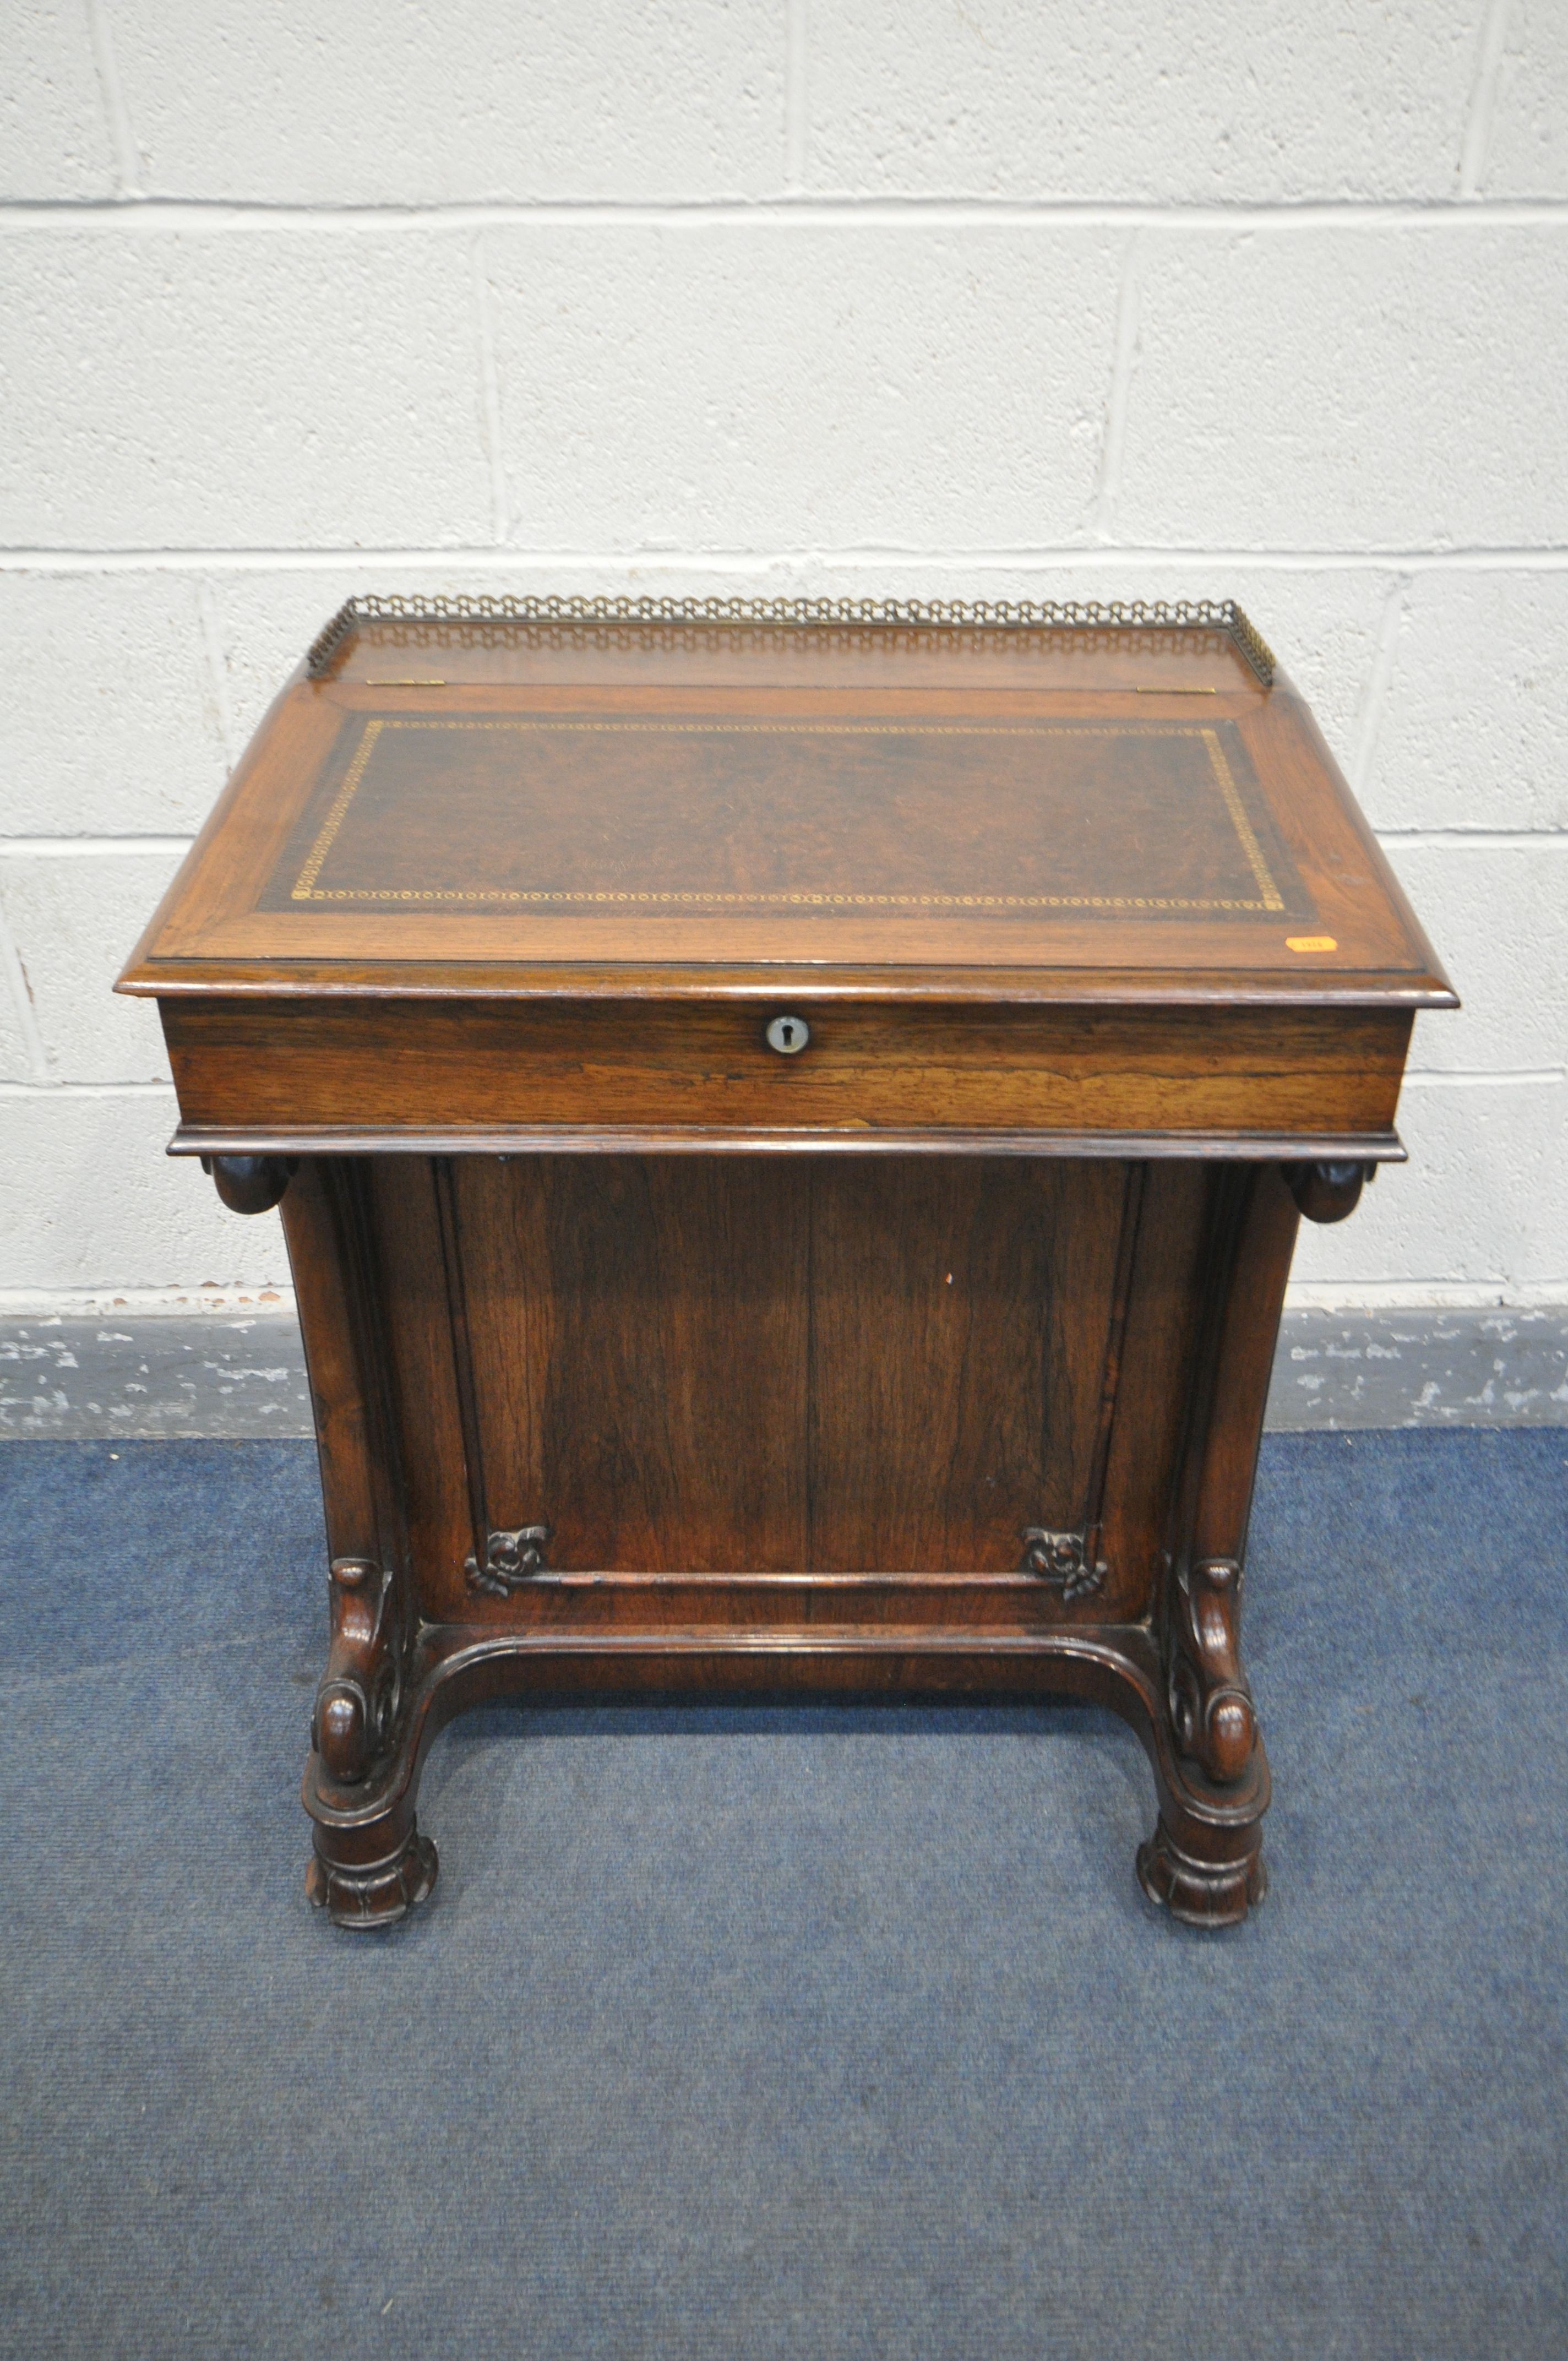 AN EARLY 19TH CENTURY ROSEWOOD DAVENPORT DESK, having a brass open fretwork gallery behind a leather - Image 3 of 9